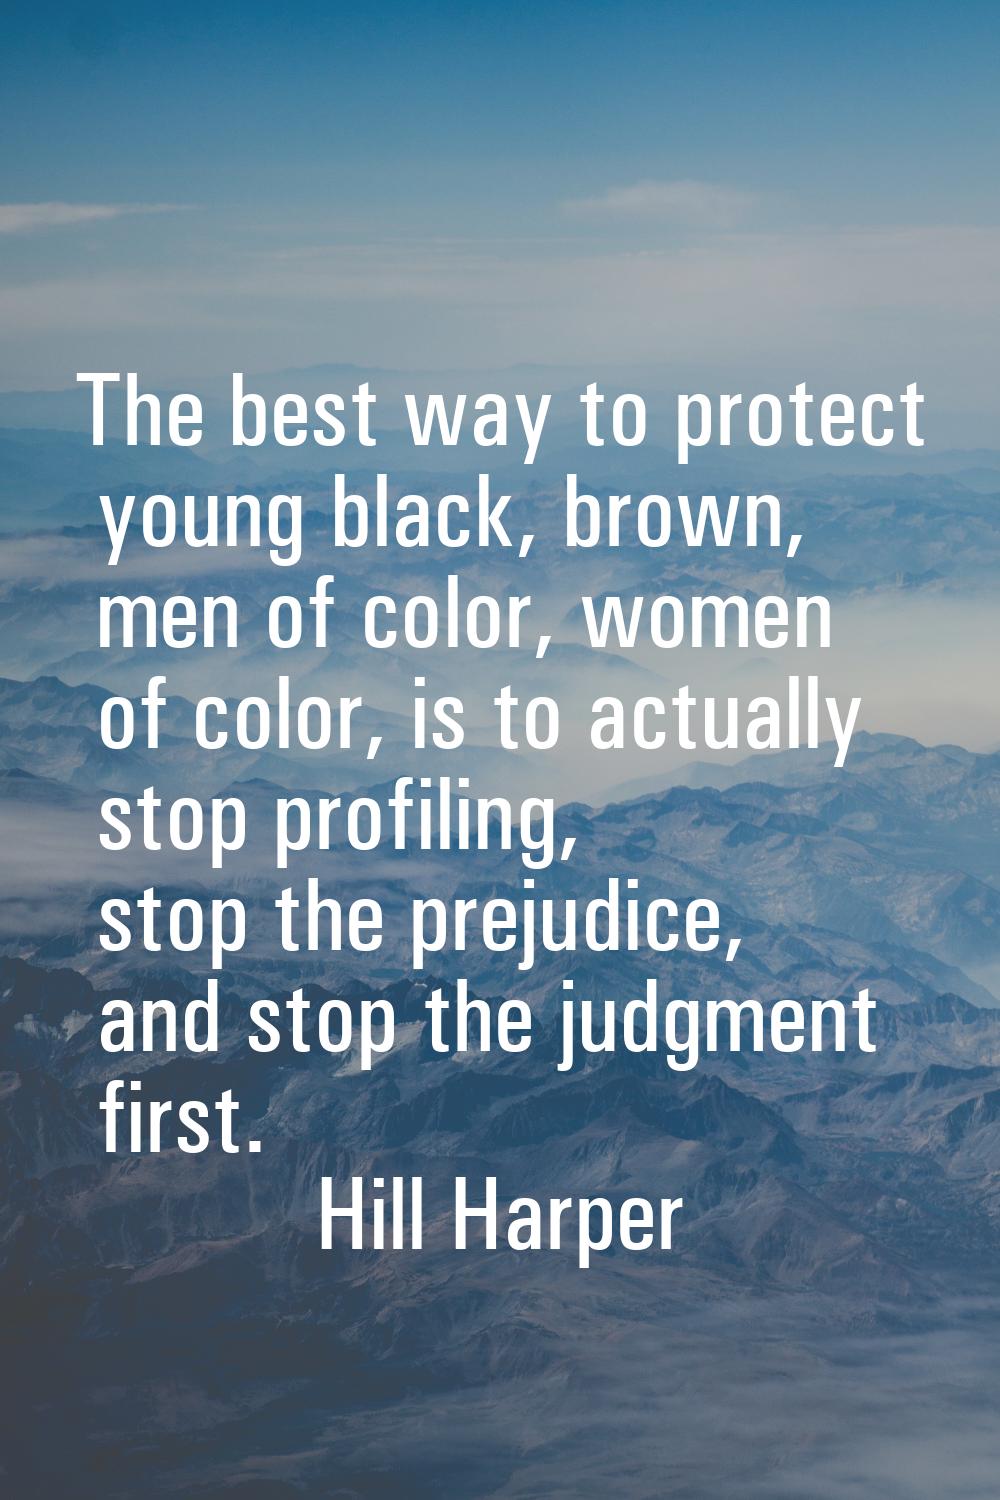 The best way to protect young black, brown, men of color, women of color, is to actually stop profi